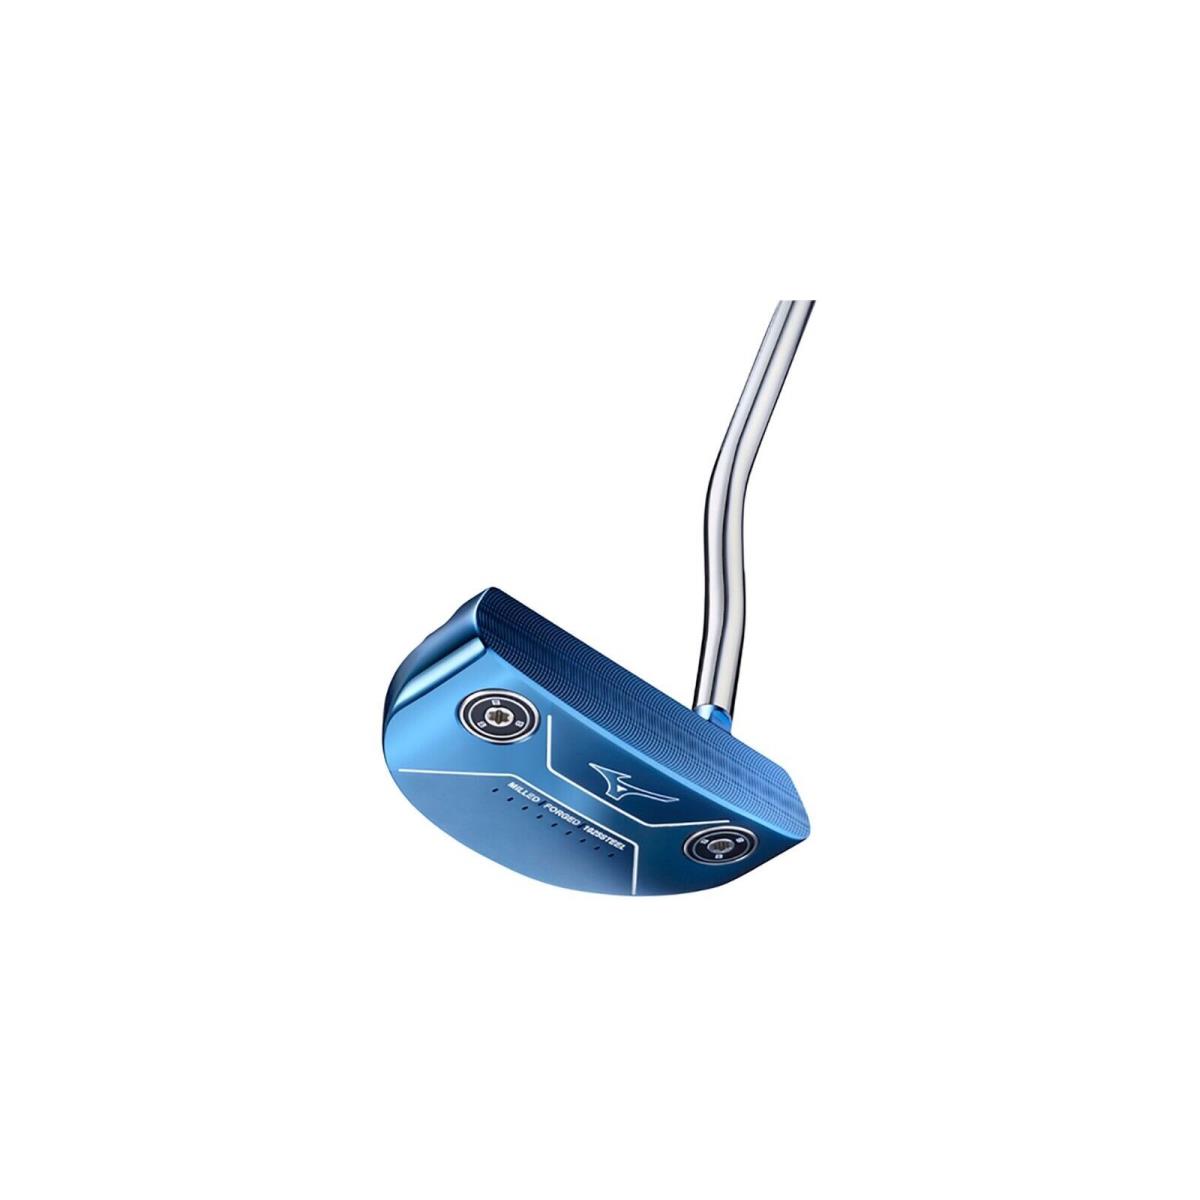 Mizuno M Craft Putter Type Iii Blue Ion Right Hand 35 RH Includes Weights Cover